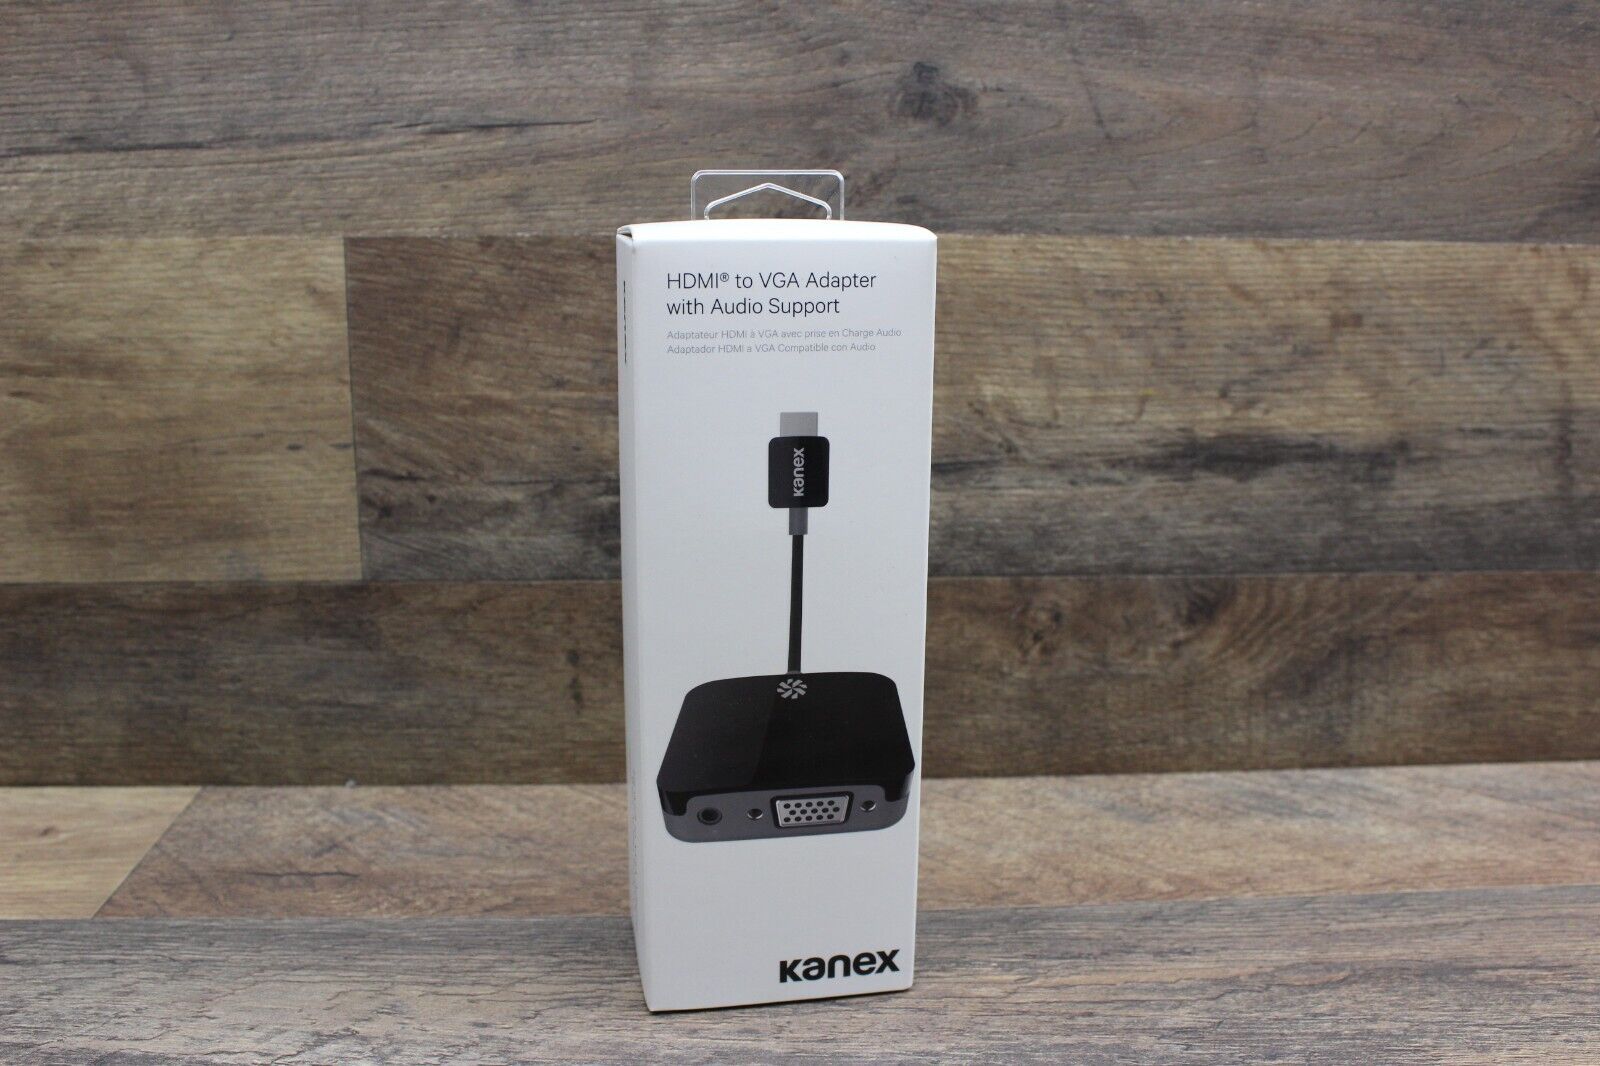 Kanex HDMI to VGA Adapter with Audio Support for Apple TV 4th Gen 4K and Roku